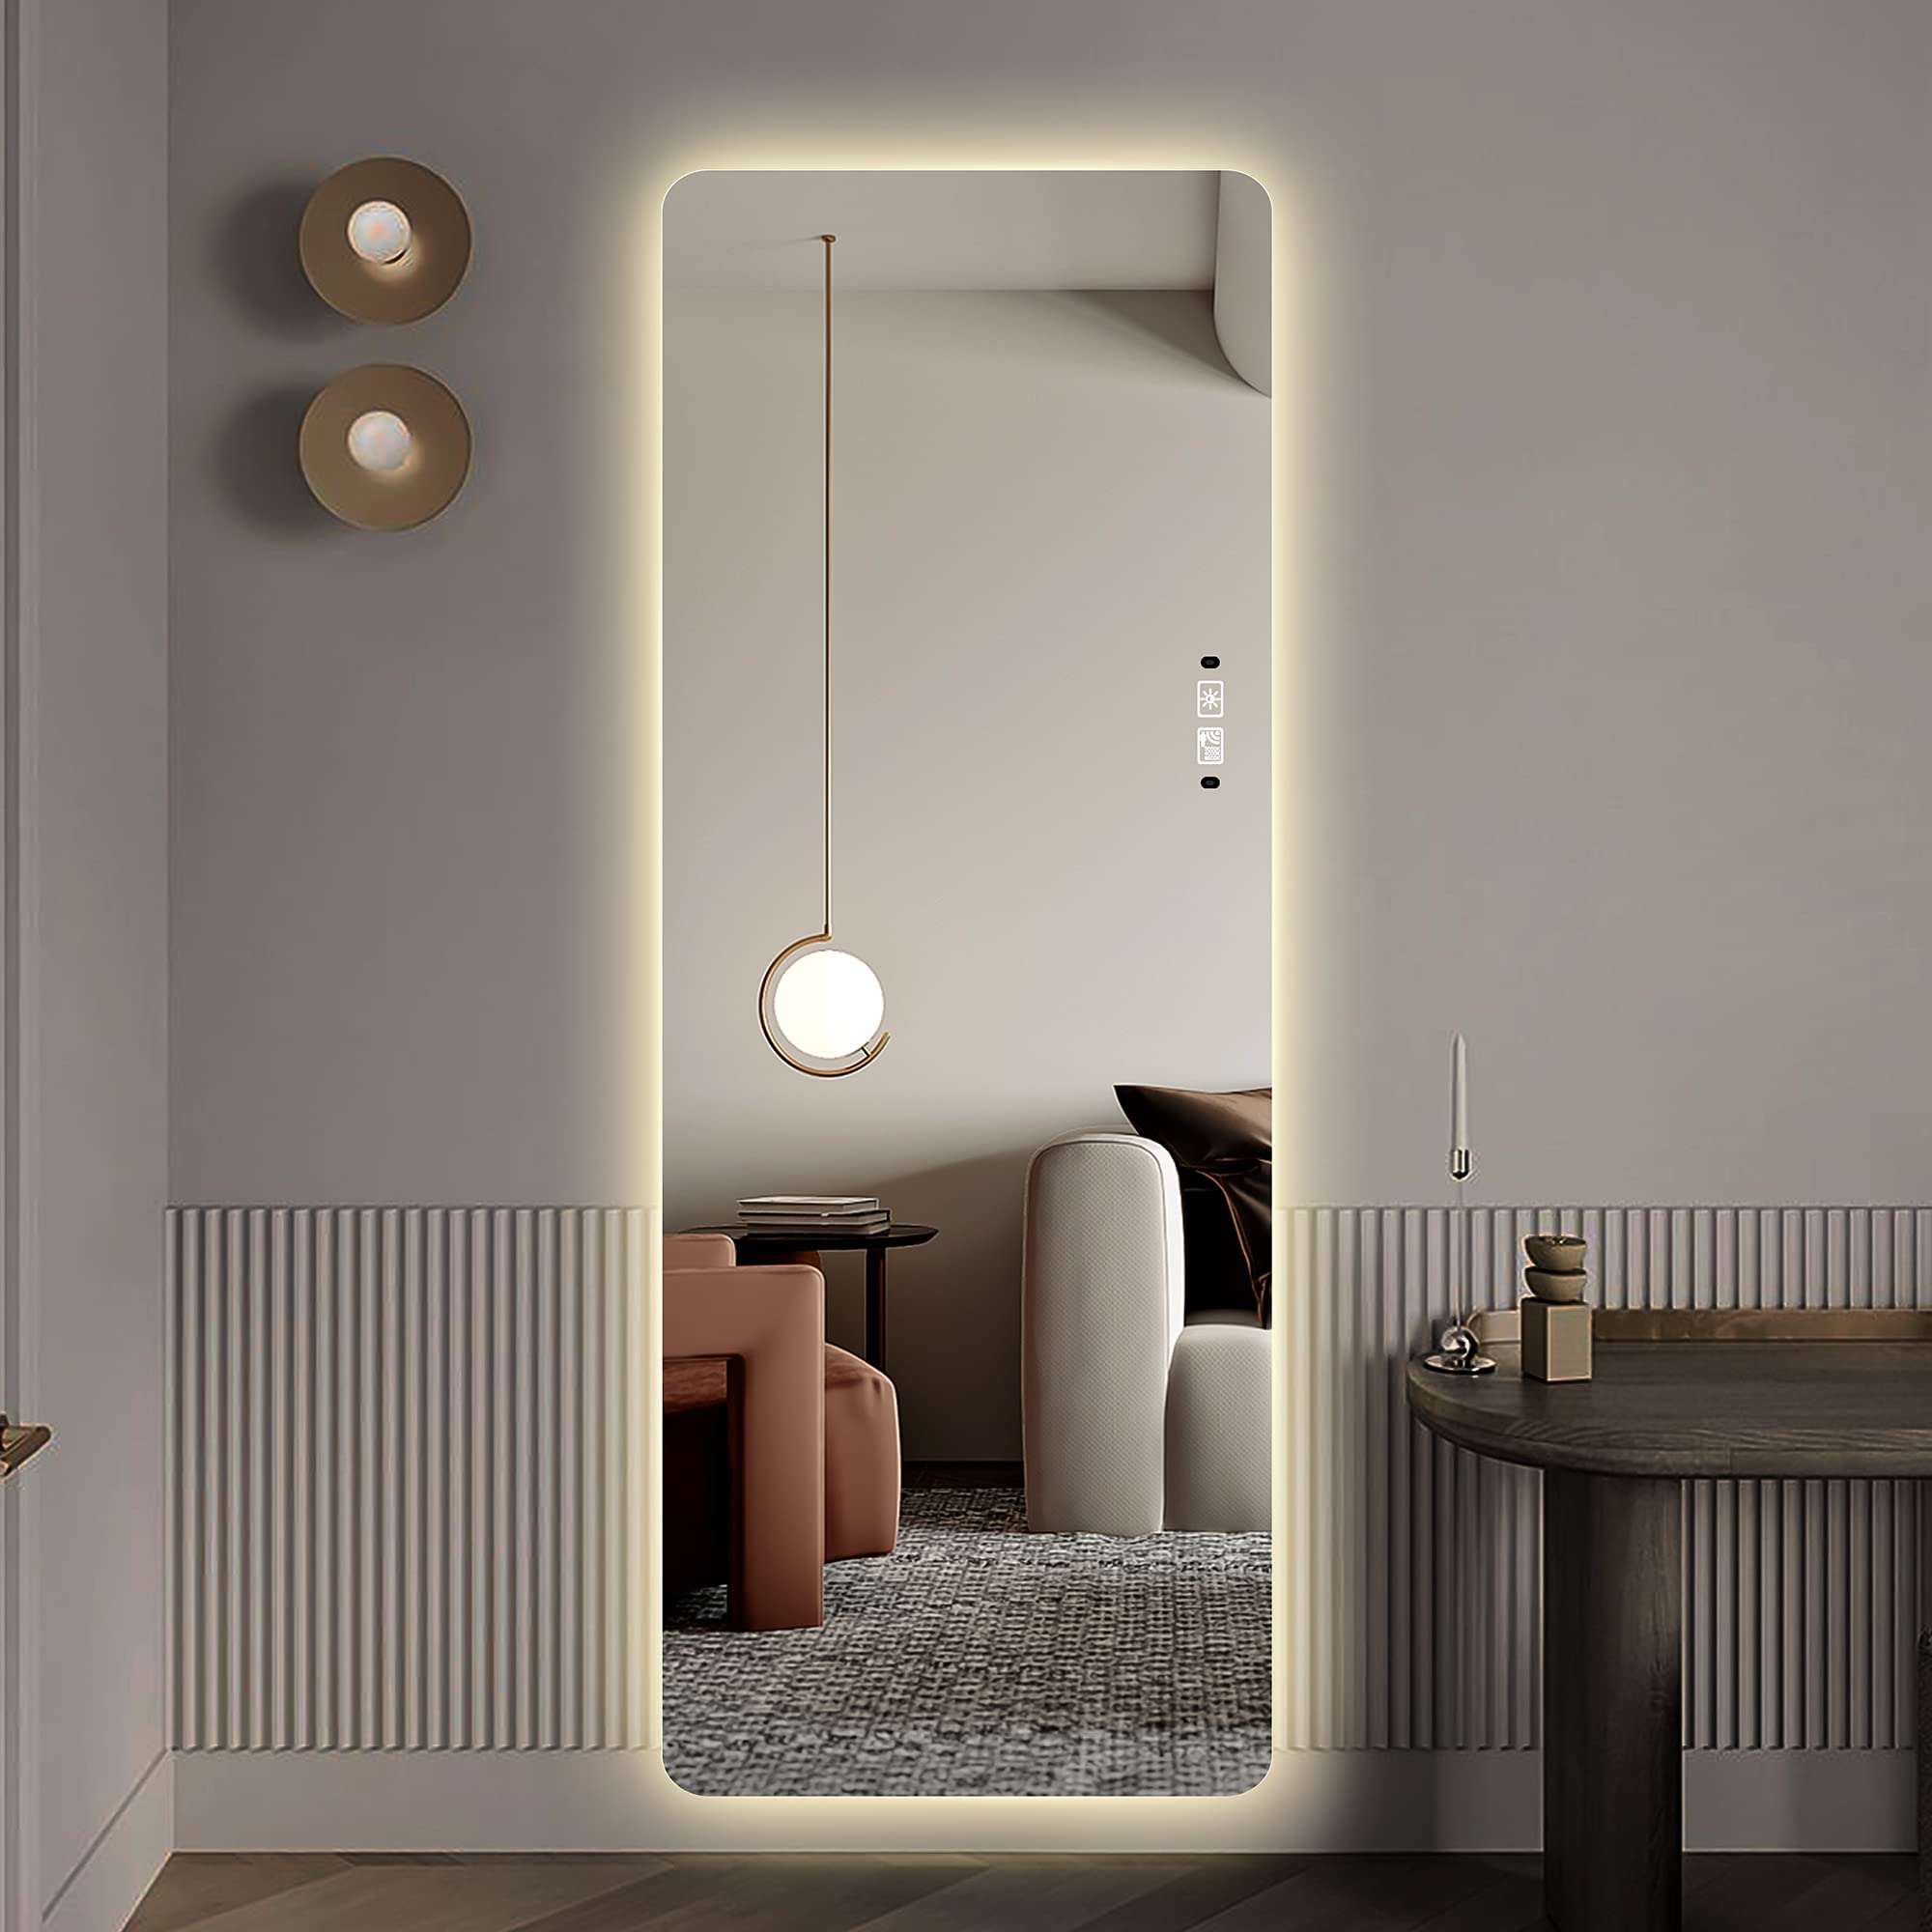 A large mirror reflecting a person's full body.